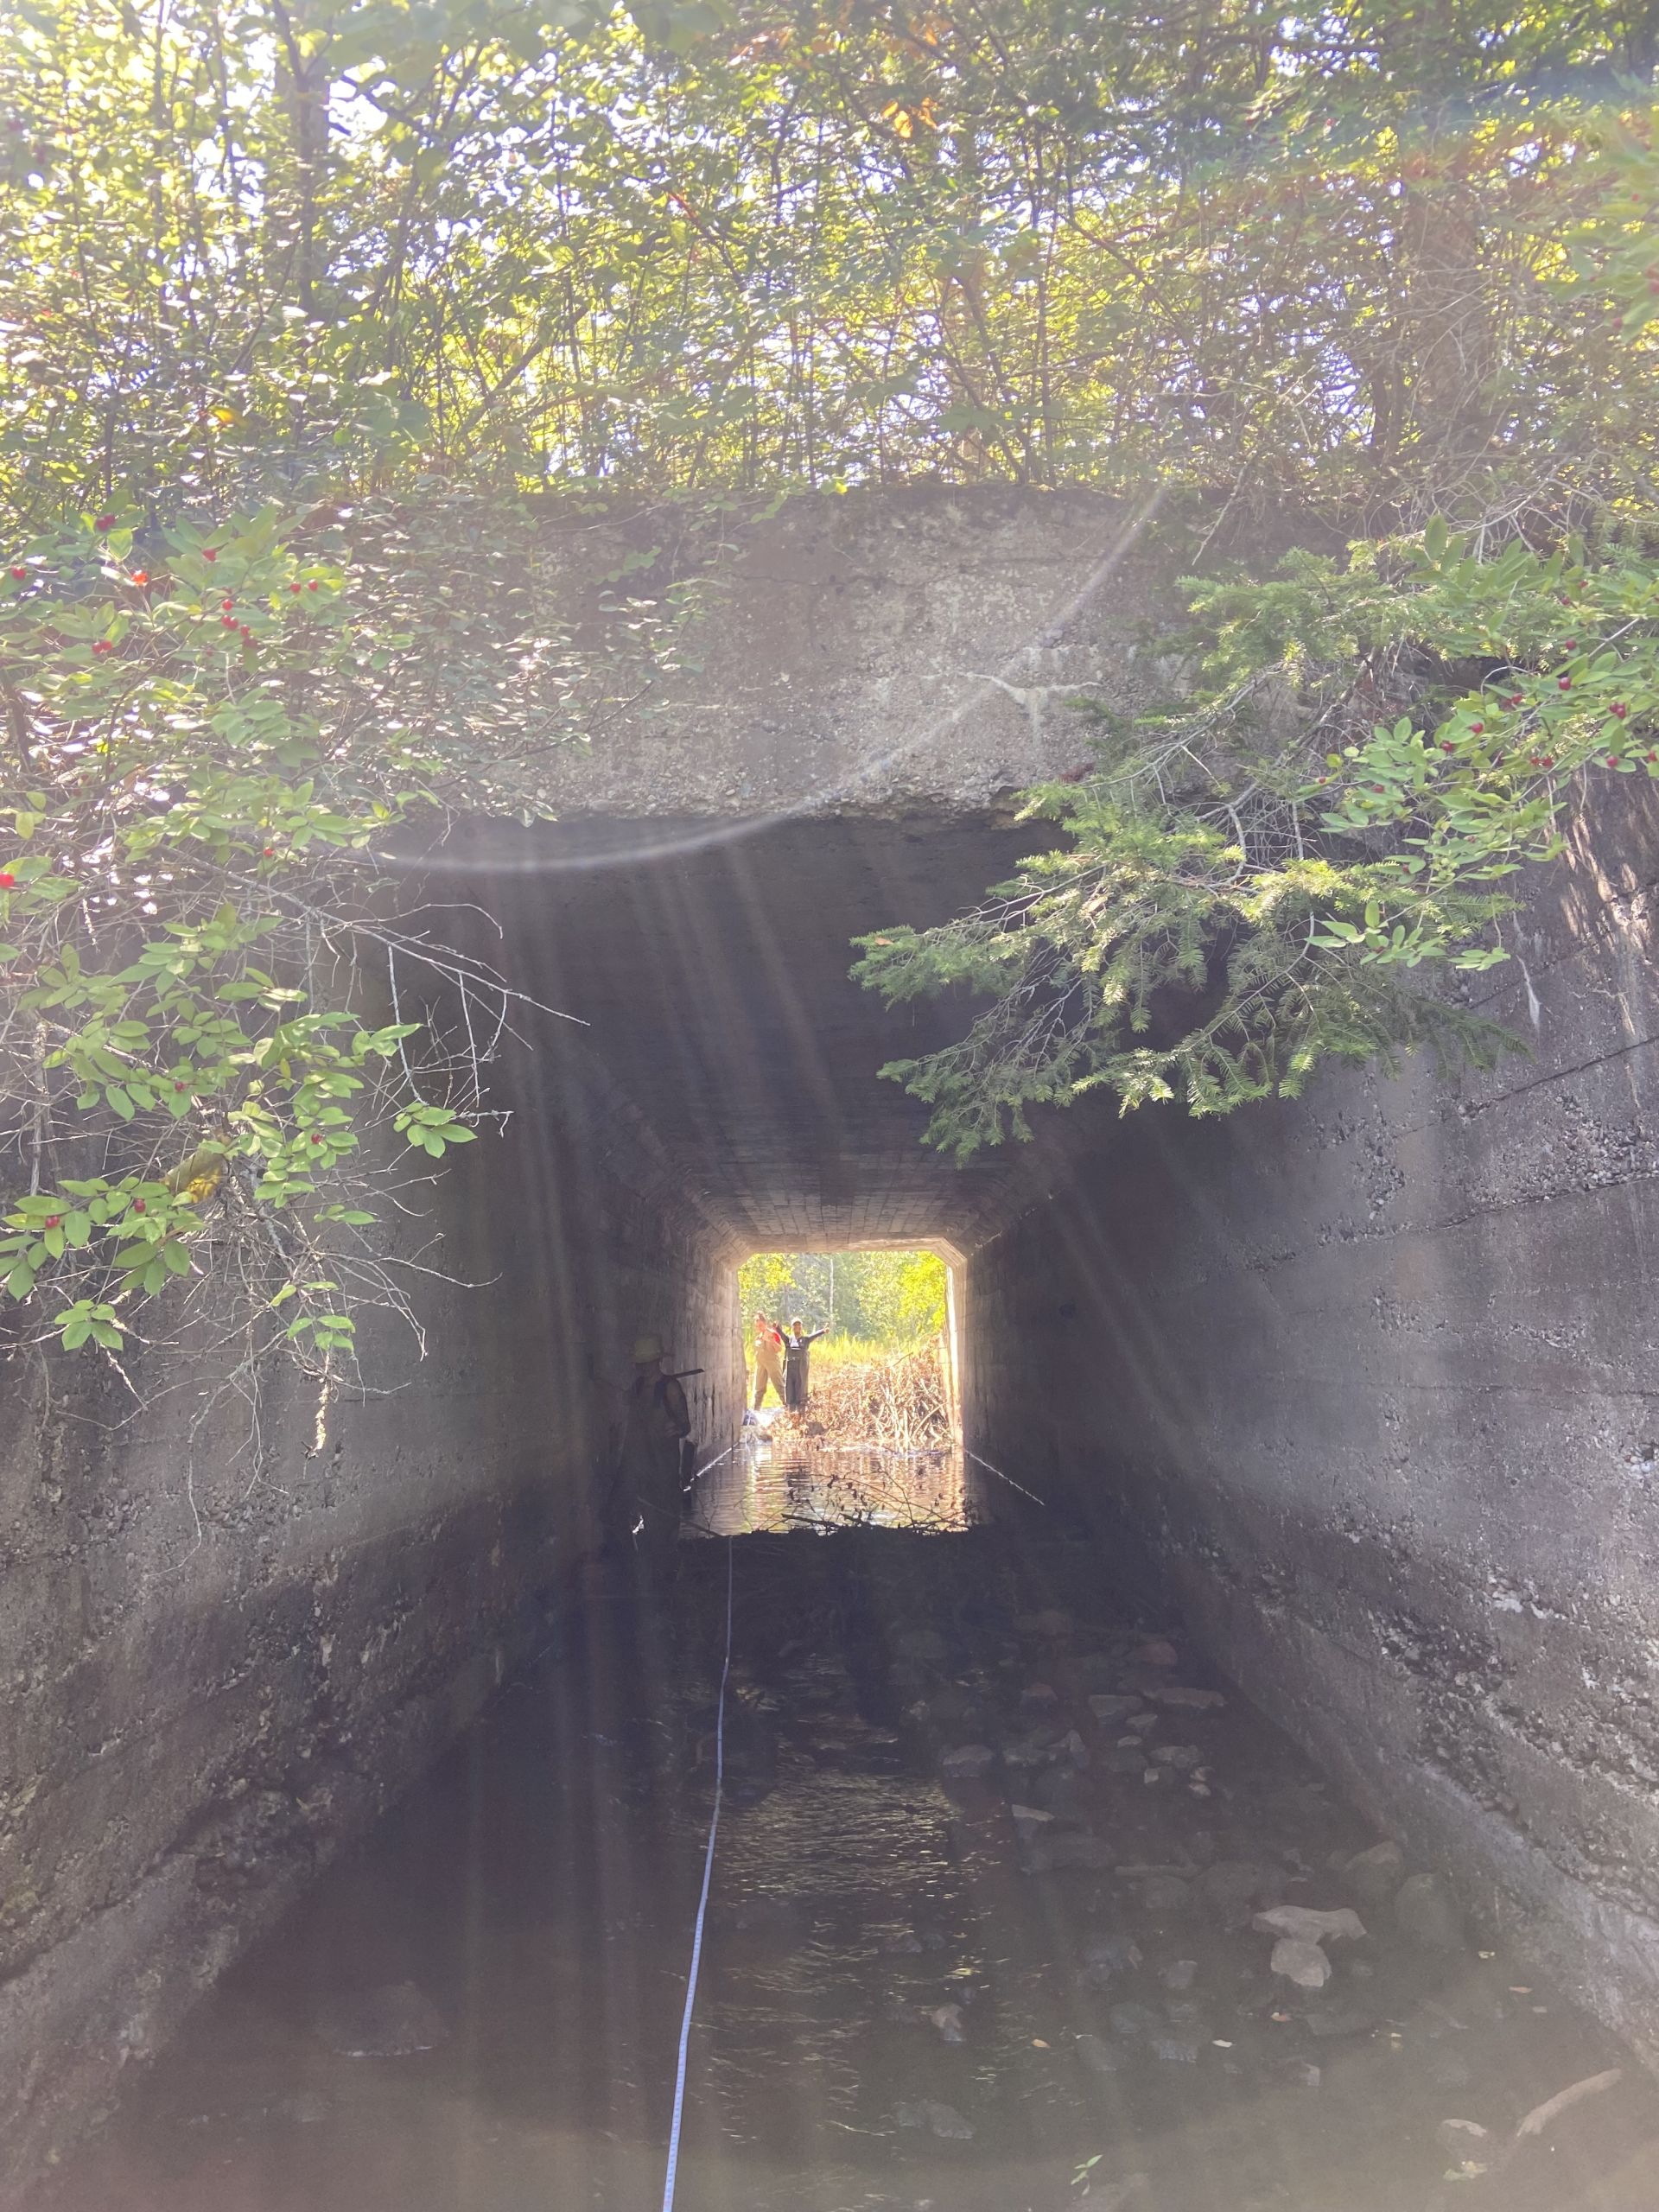 An image looking through a tunnel